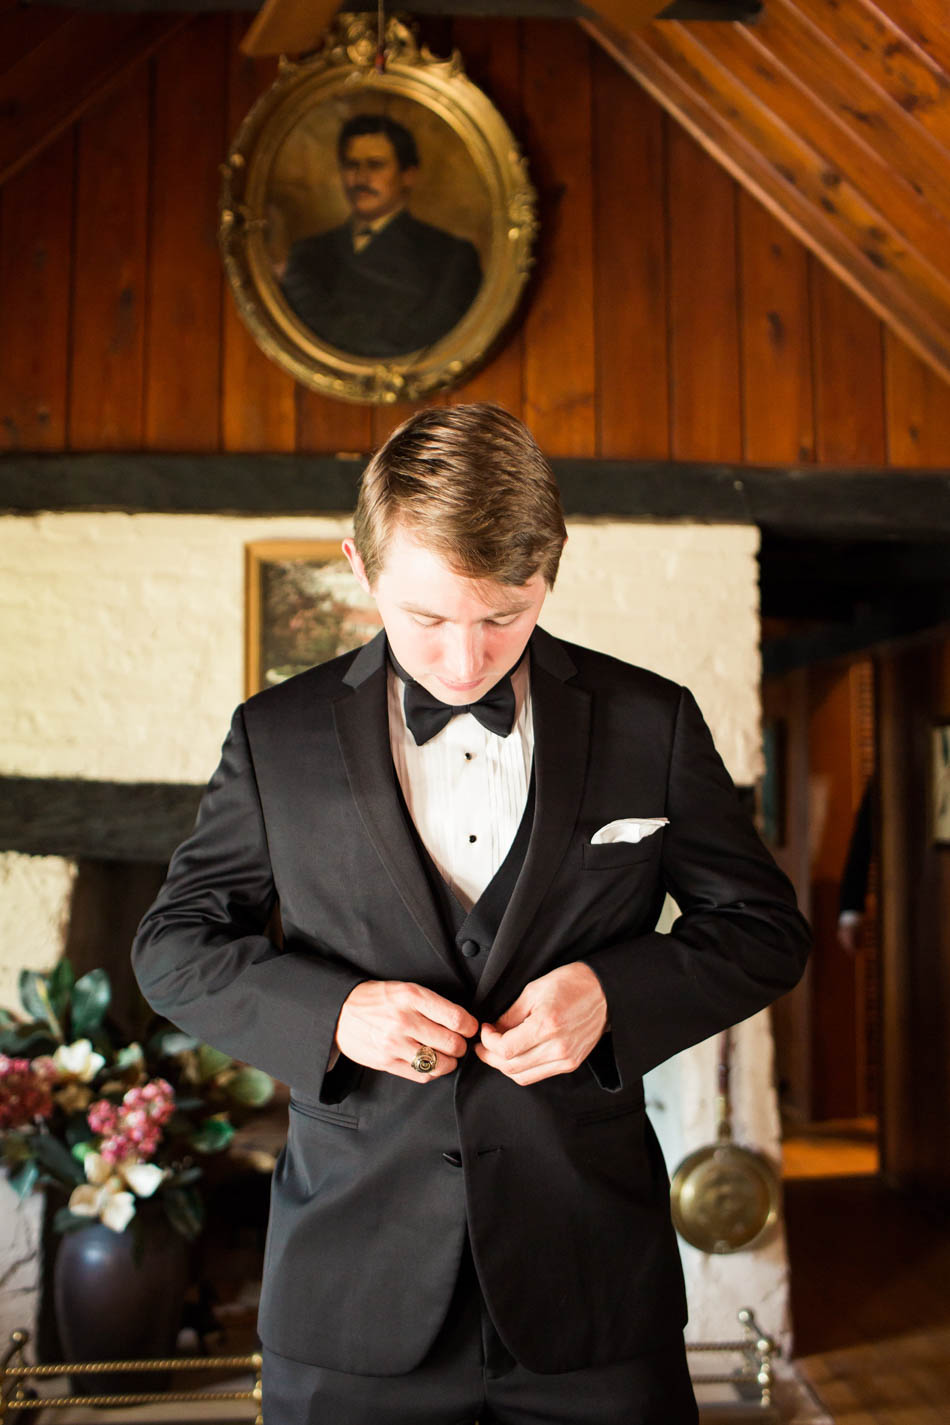 Groomsmen get ready in family cabin, Oakland Plantation, Mt Pleasant, South Carolina Kate Timbers Photography. http://katetimbers.com #katetimbersphotography // Charleston Photography // Inspiration